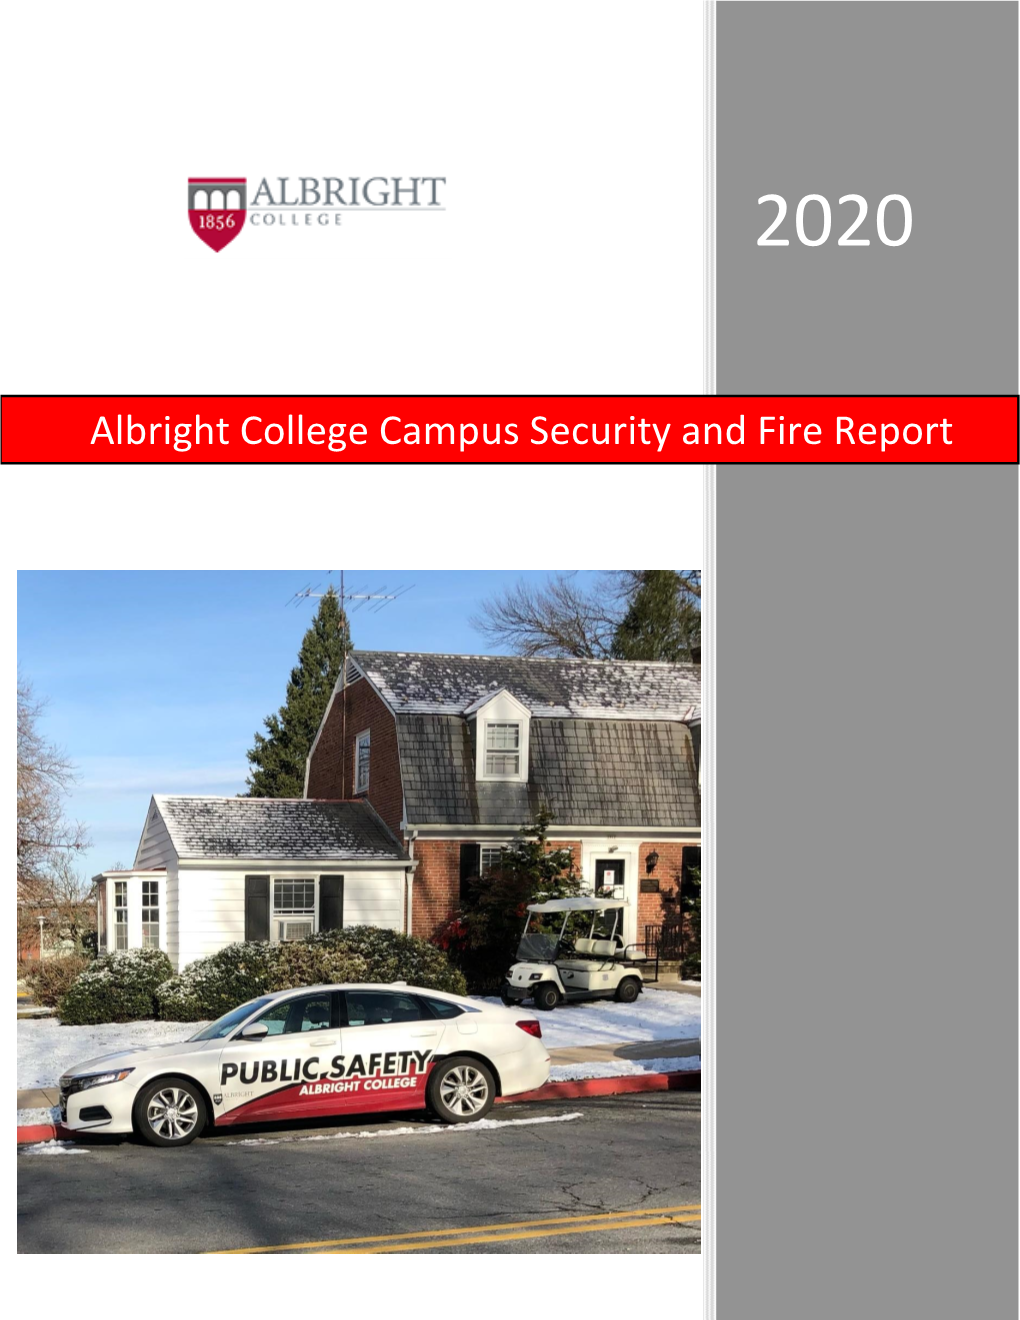 Albright College Campus Security and Fire Report